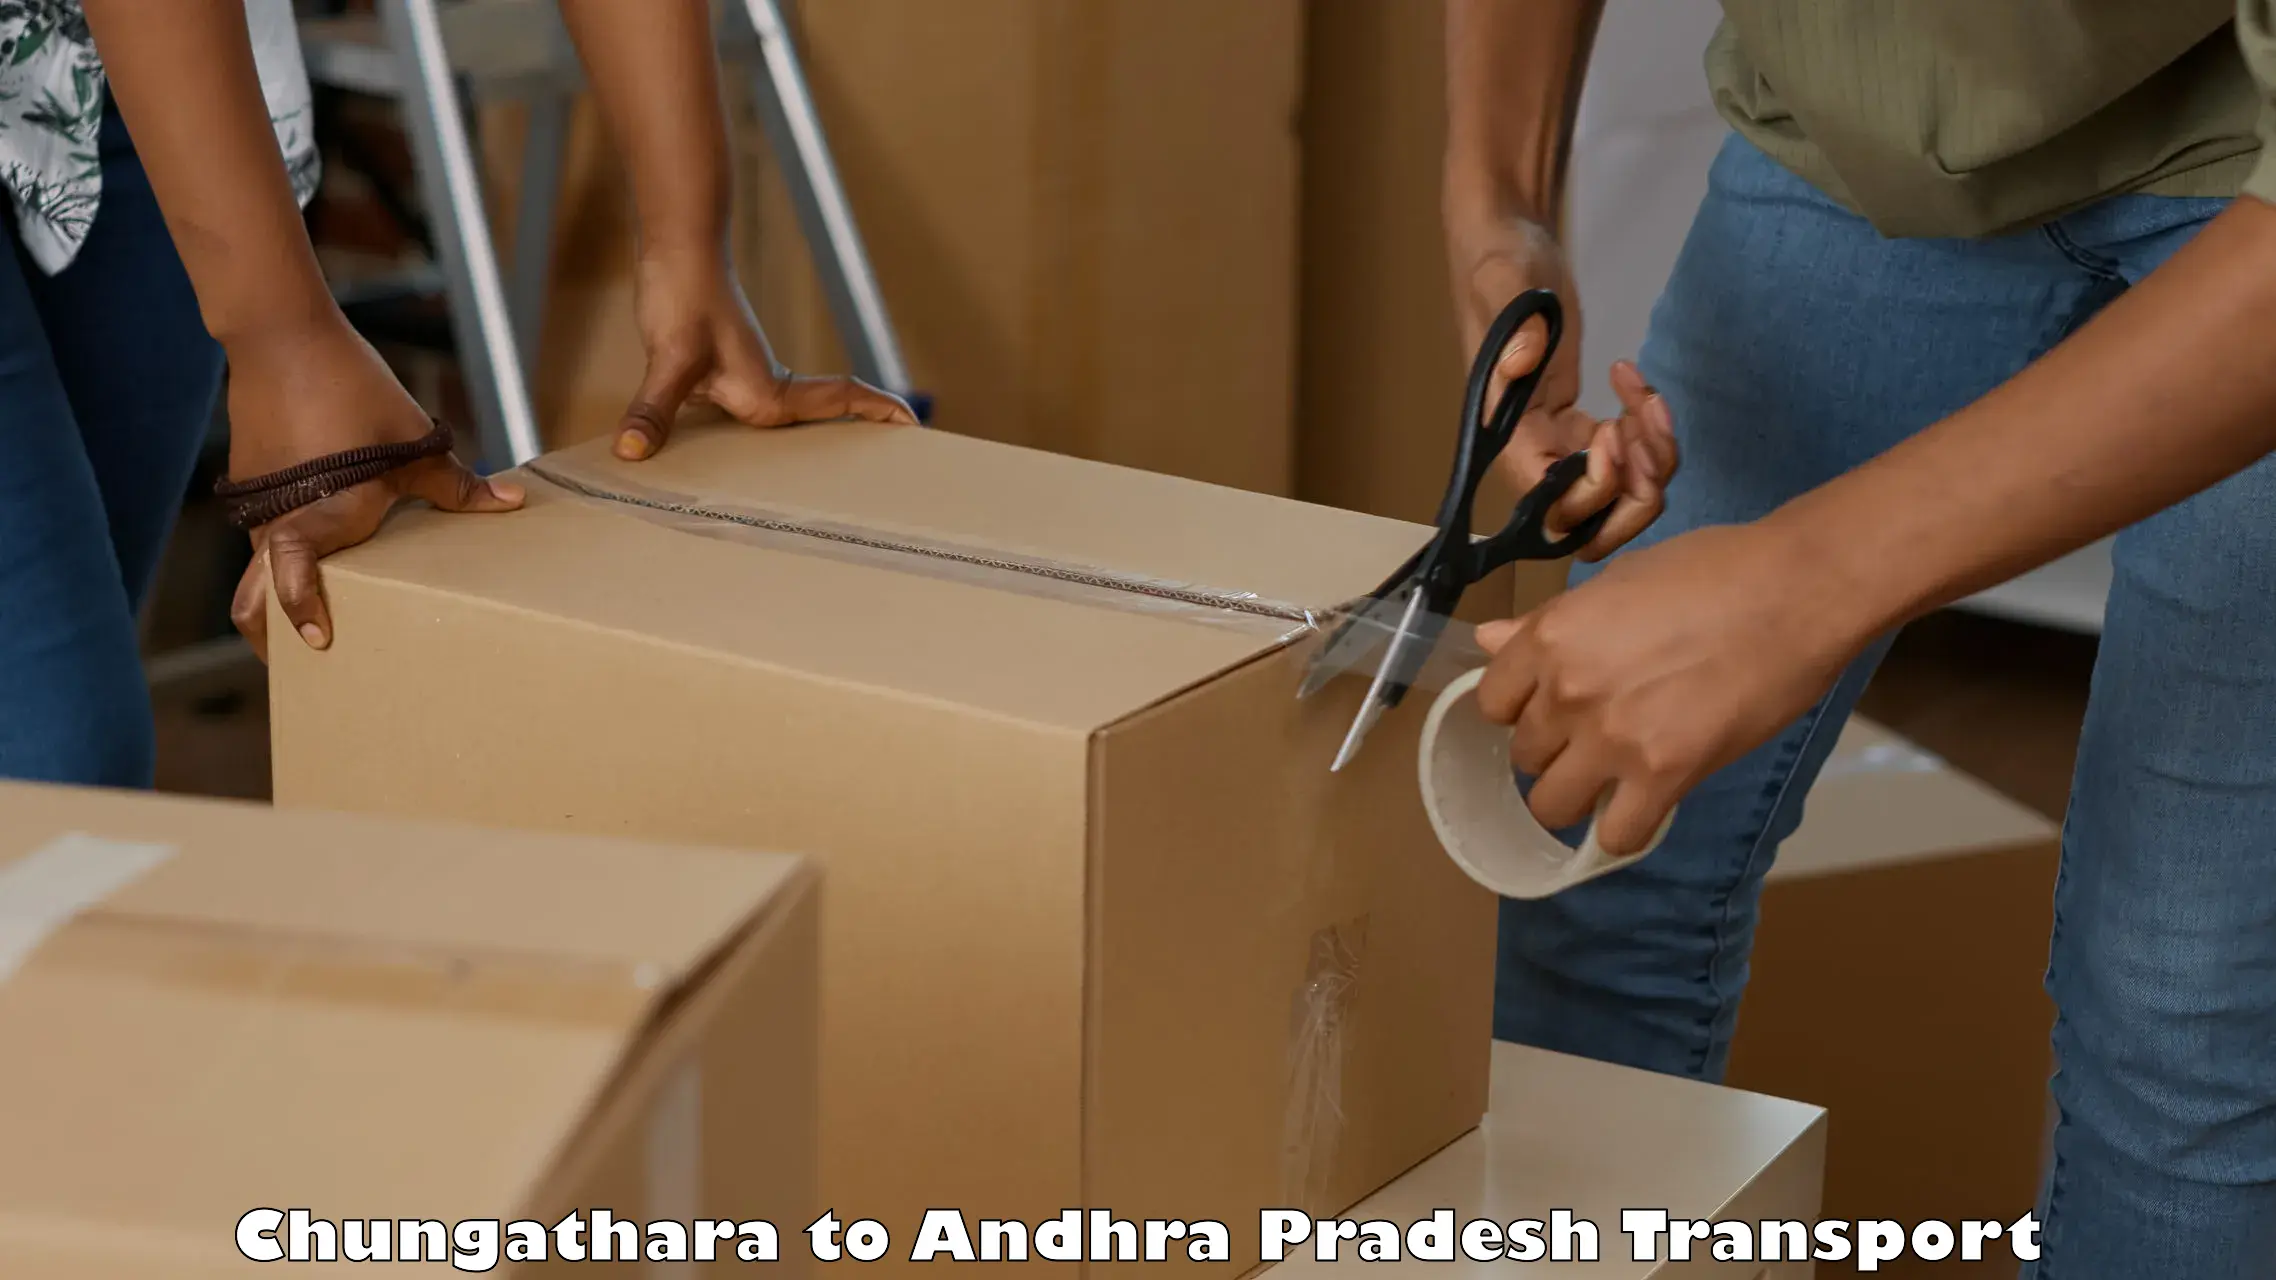 Container transport service Chungathara to Tripuranthakam